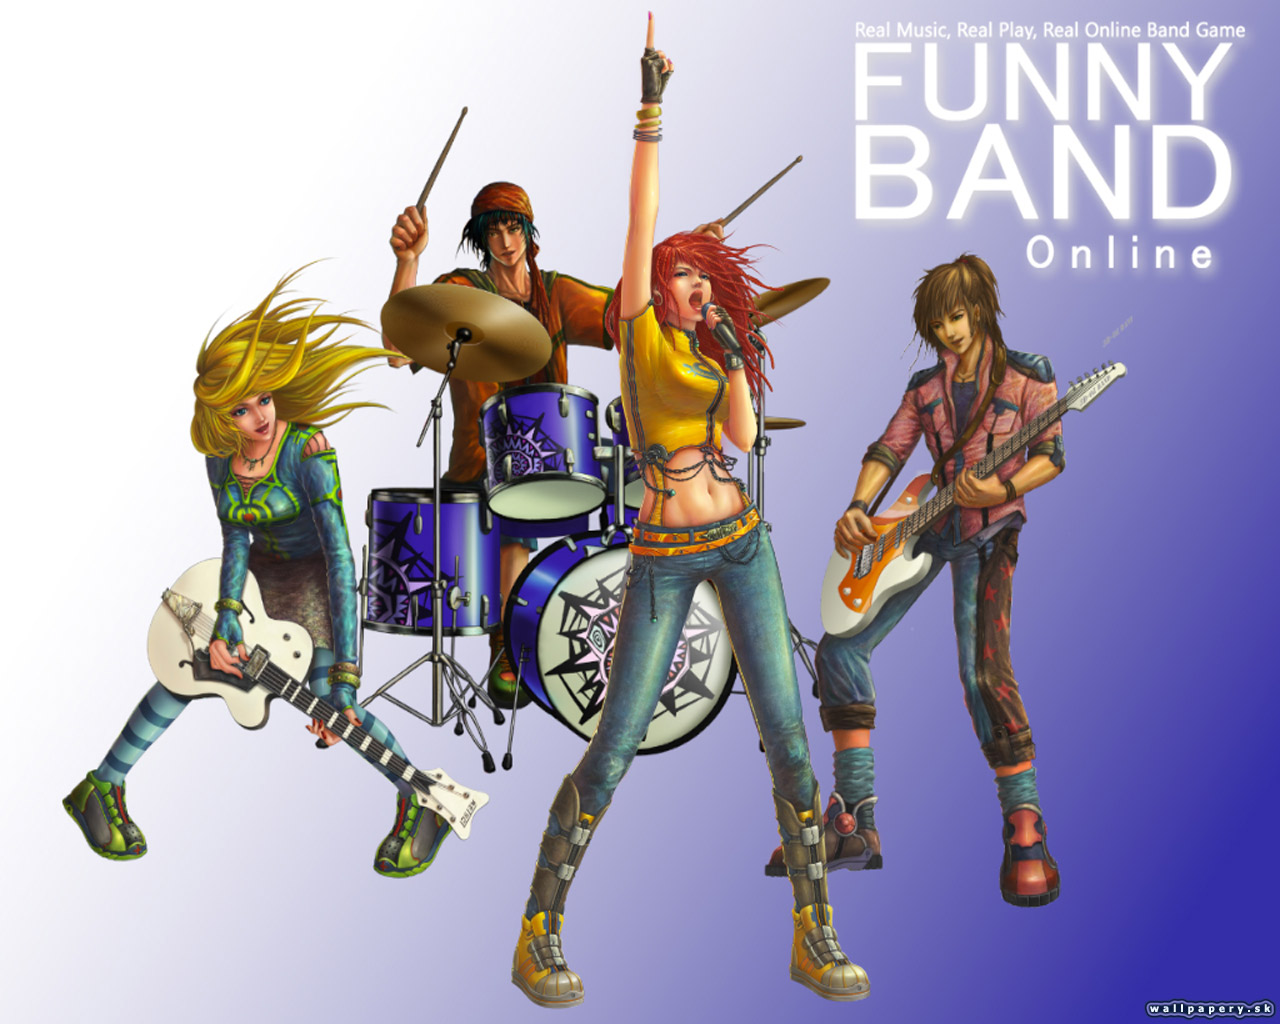 Funny Band Online - wallpaper 3